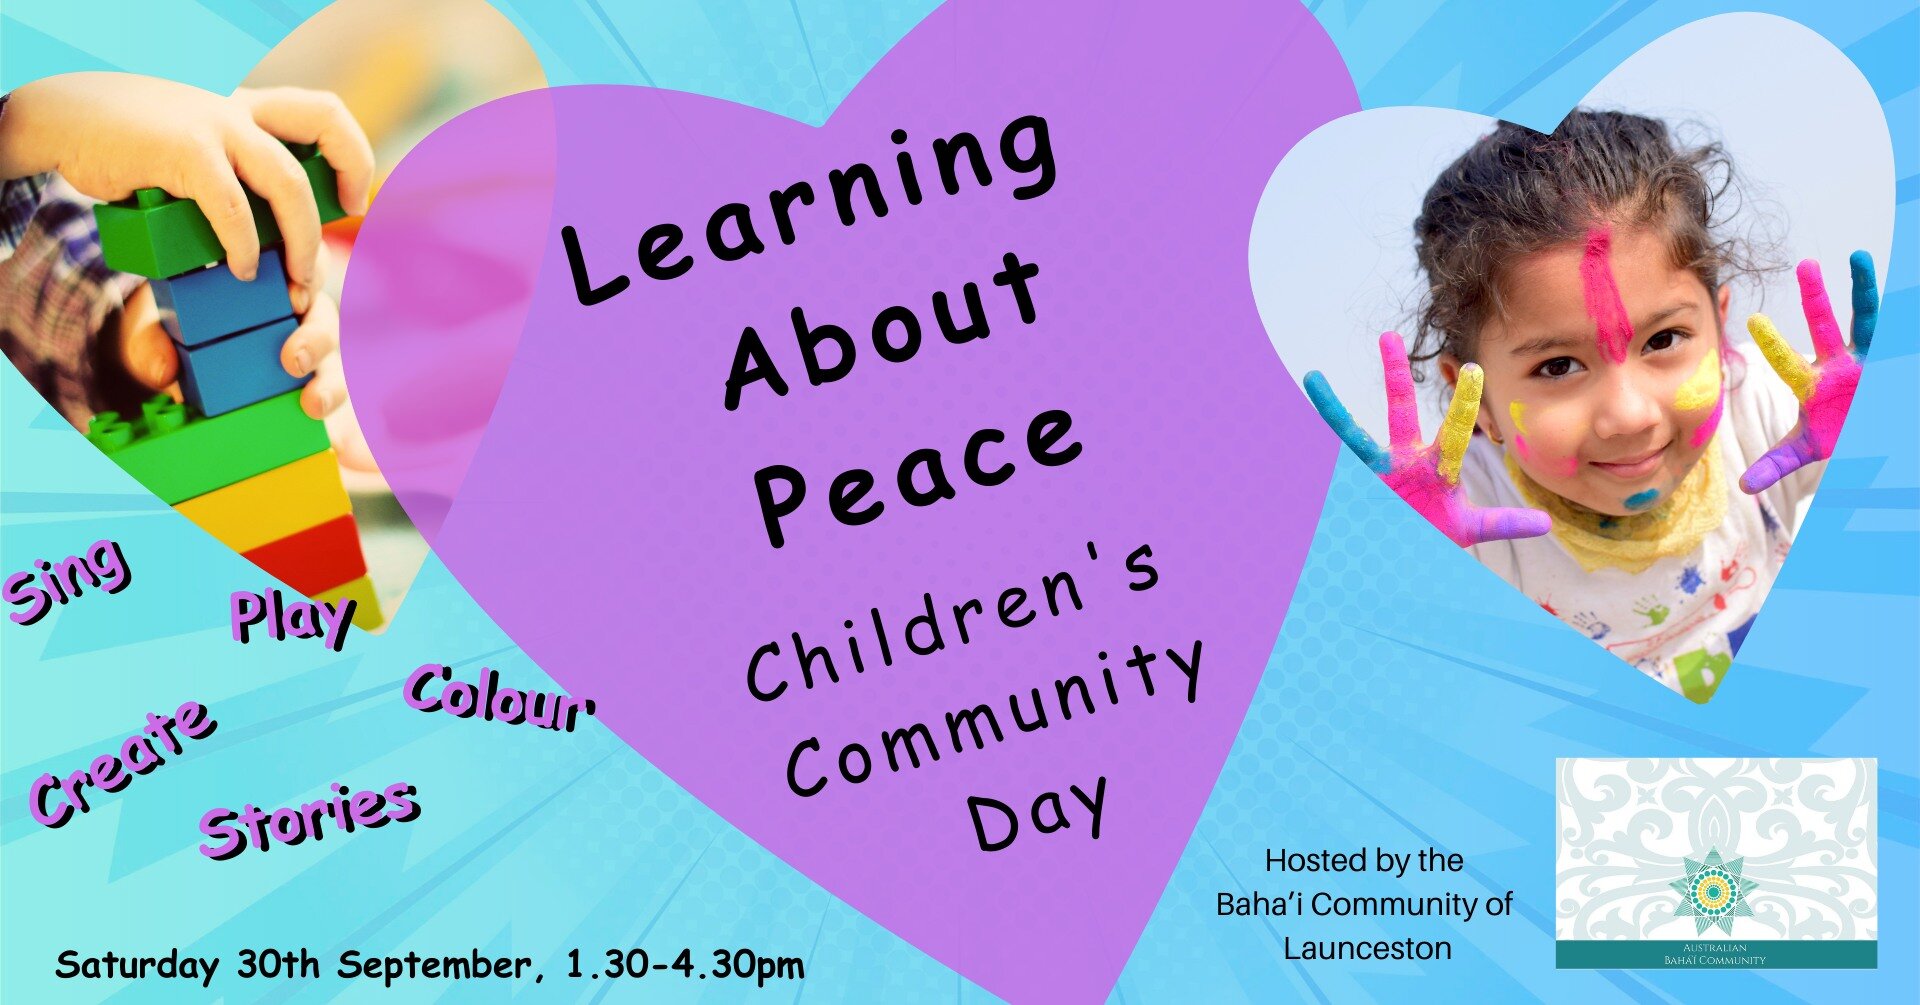 EVENT HAPPENNING TOMORROW

Learning About Peace - The Children's Community Day
Northern Suburbs Community Centre- 1.30pm
https://www.facebook.com/events/1226724347882009/